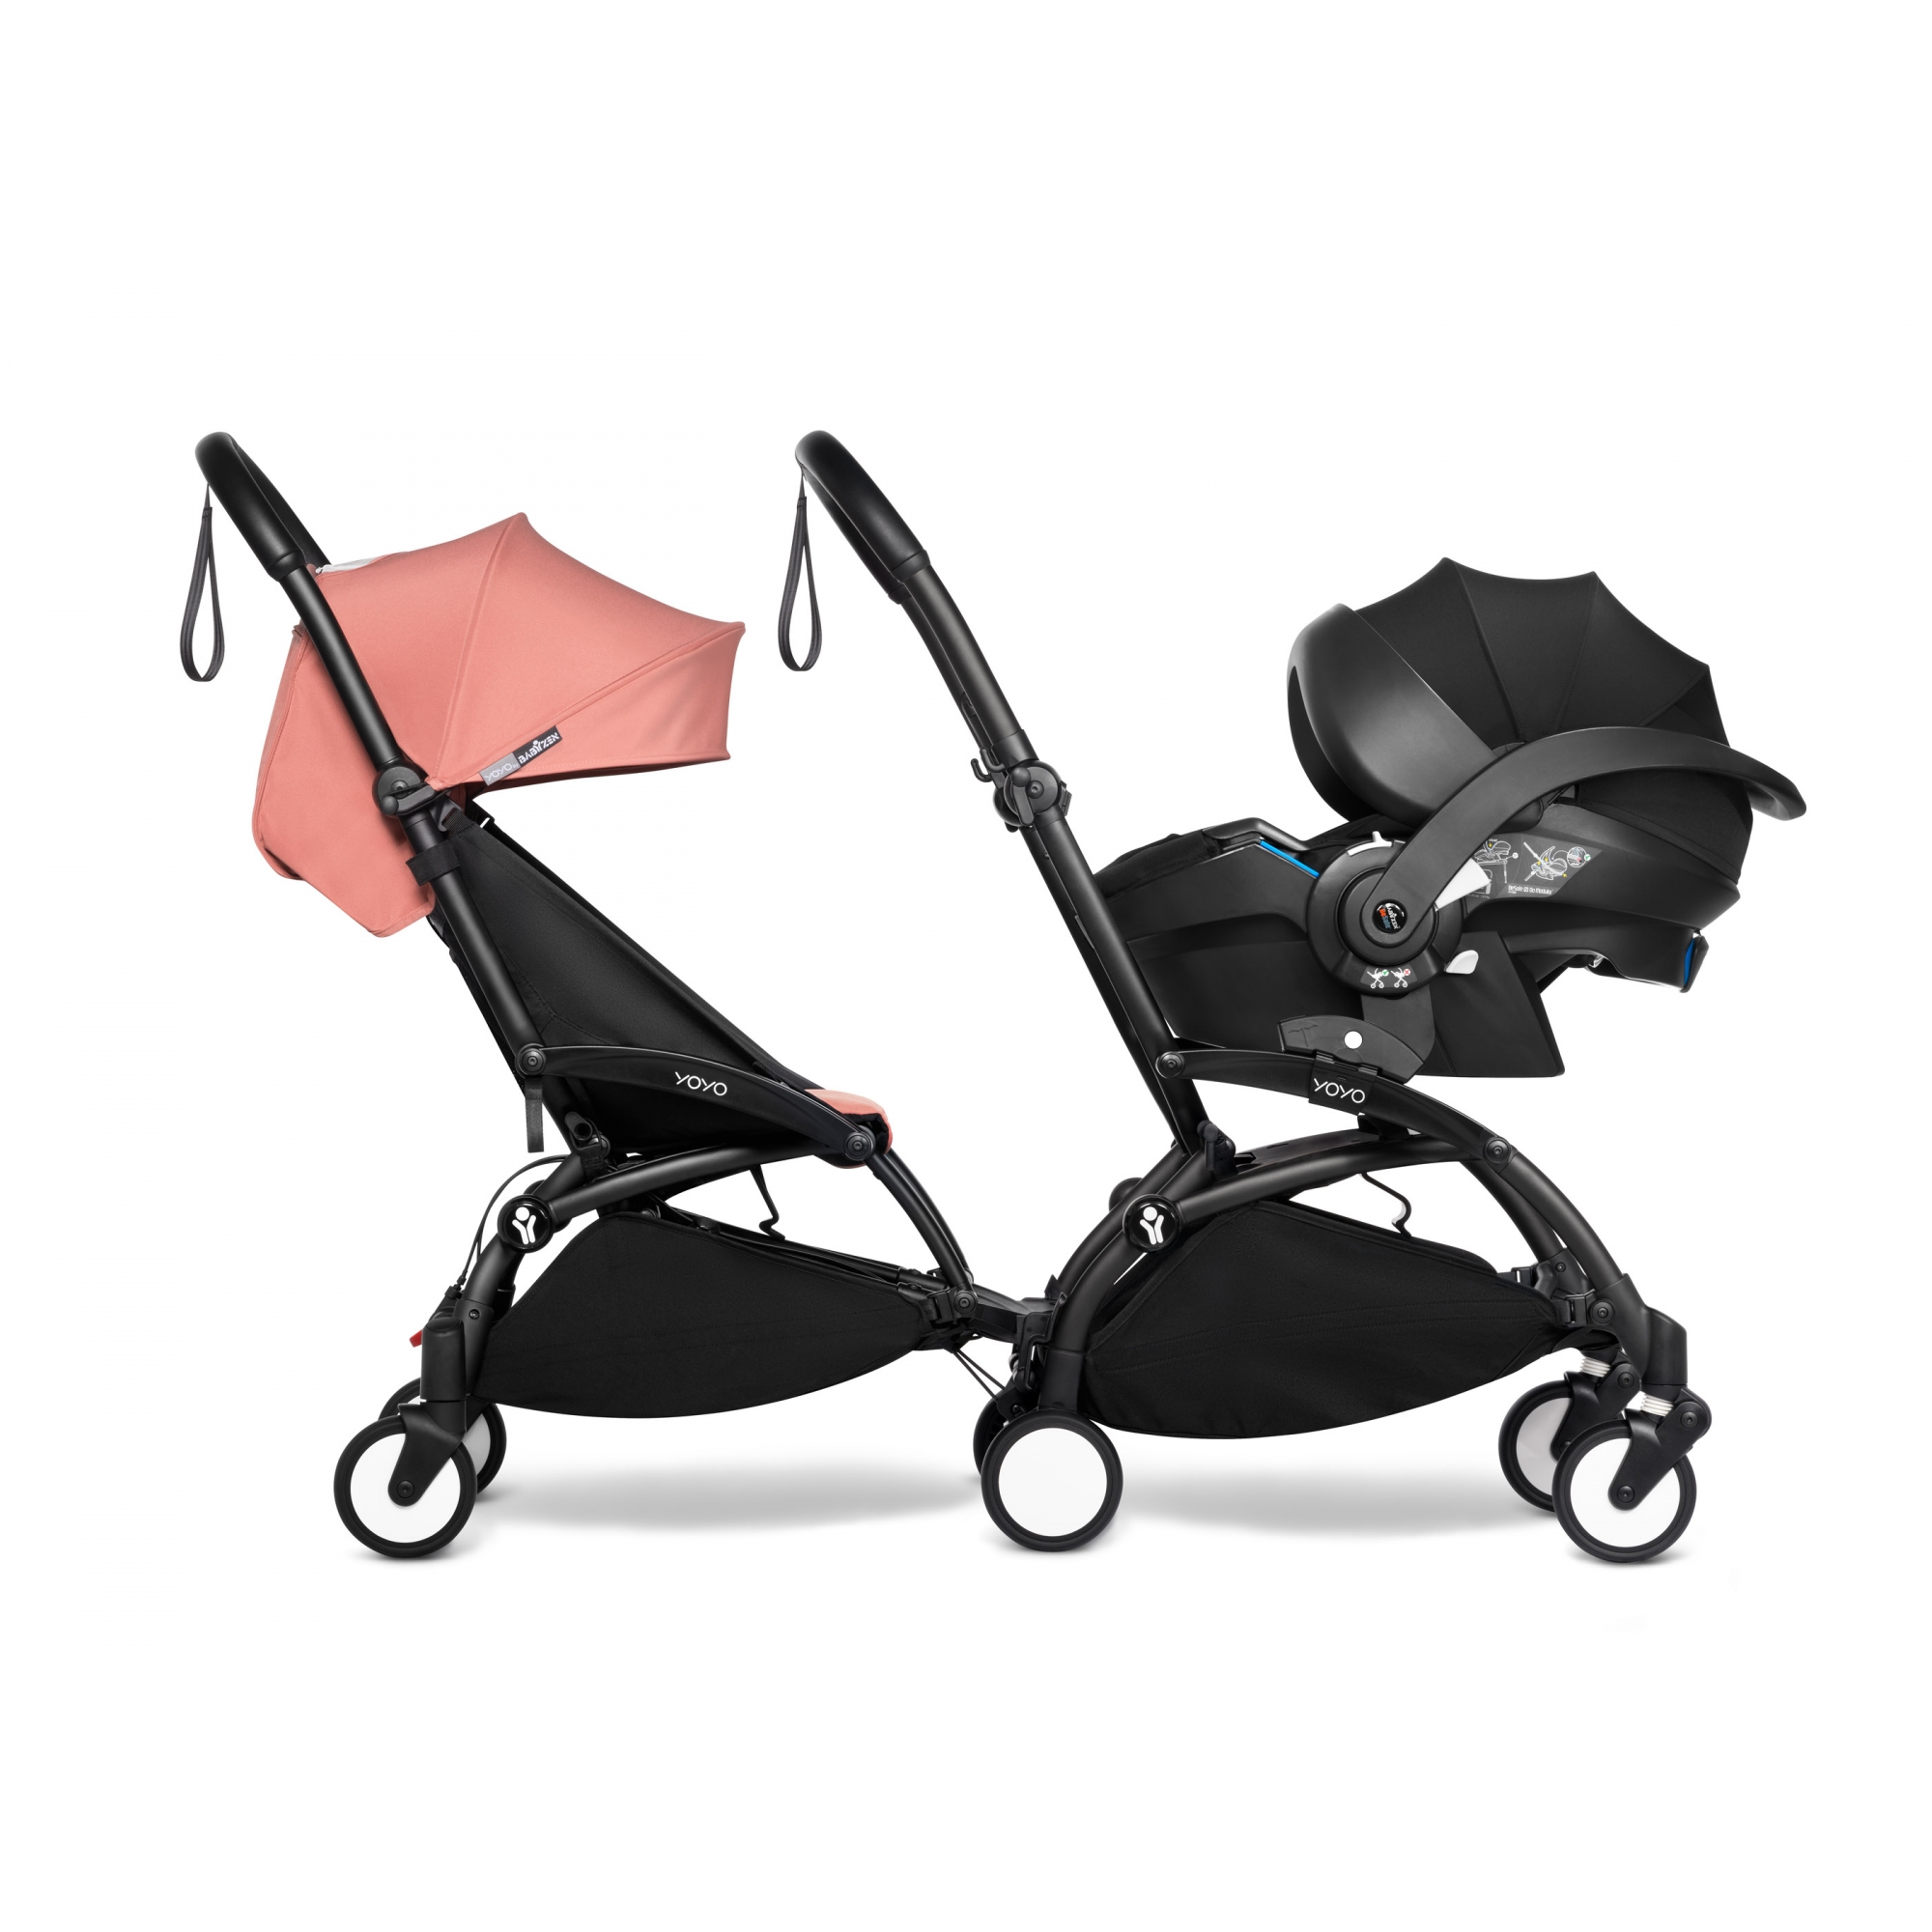 Pack poussette double Duo YOYO² Connect pack 6+ et Yoyo car seat by Besafe  - Cadre Noir - Ginger - Made in Bébé